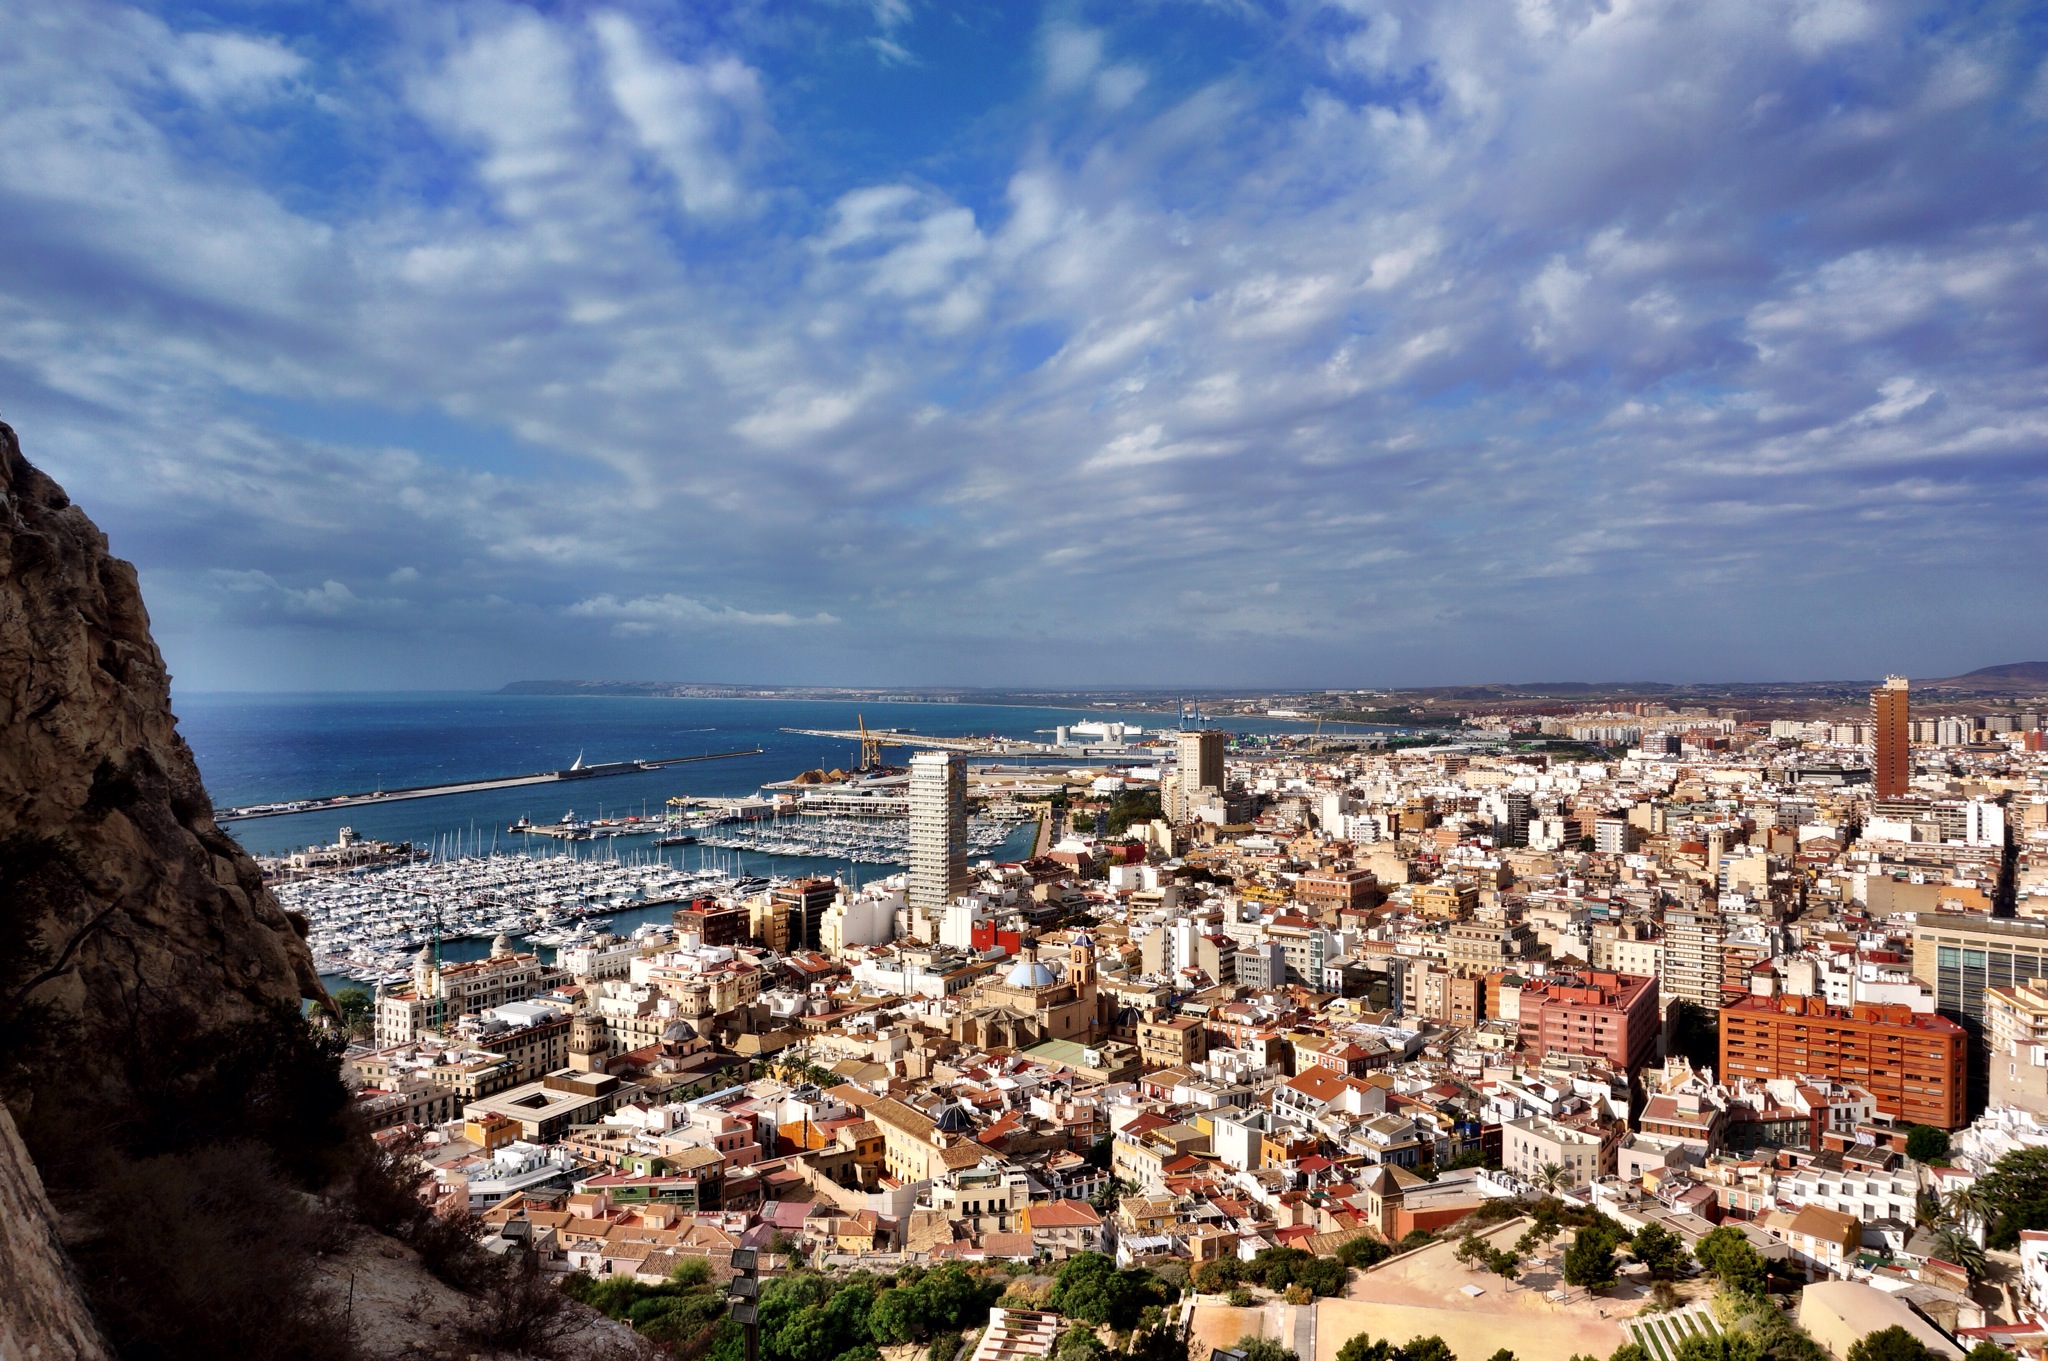 Alicante is a small beach town in the south of Spain about four hours from Barcelona.